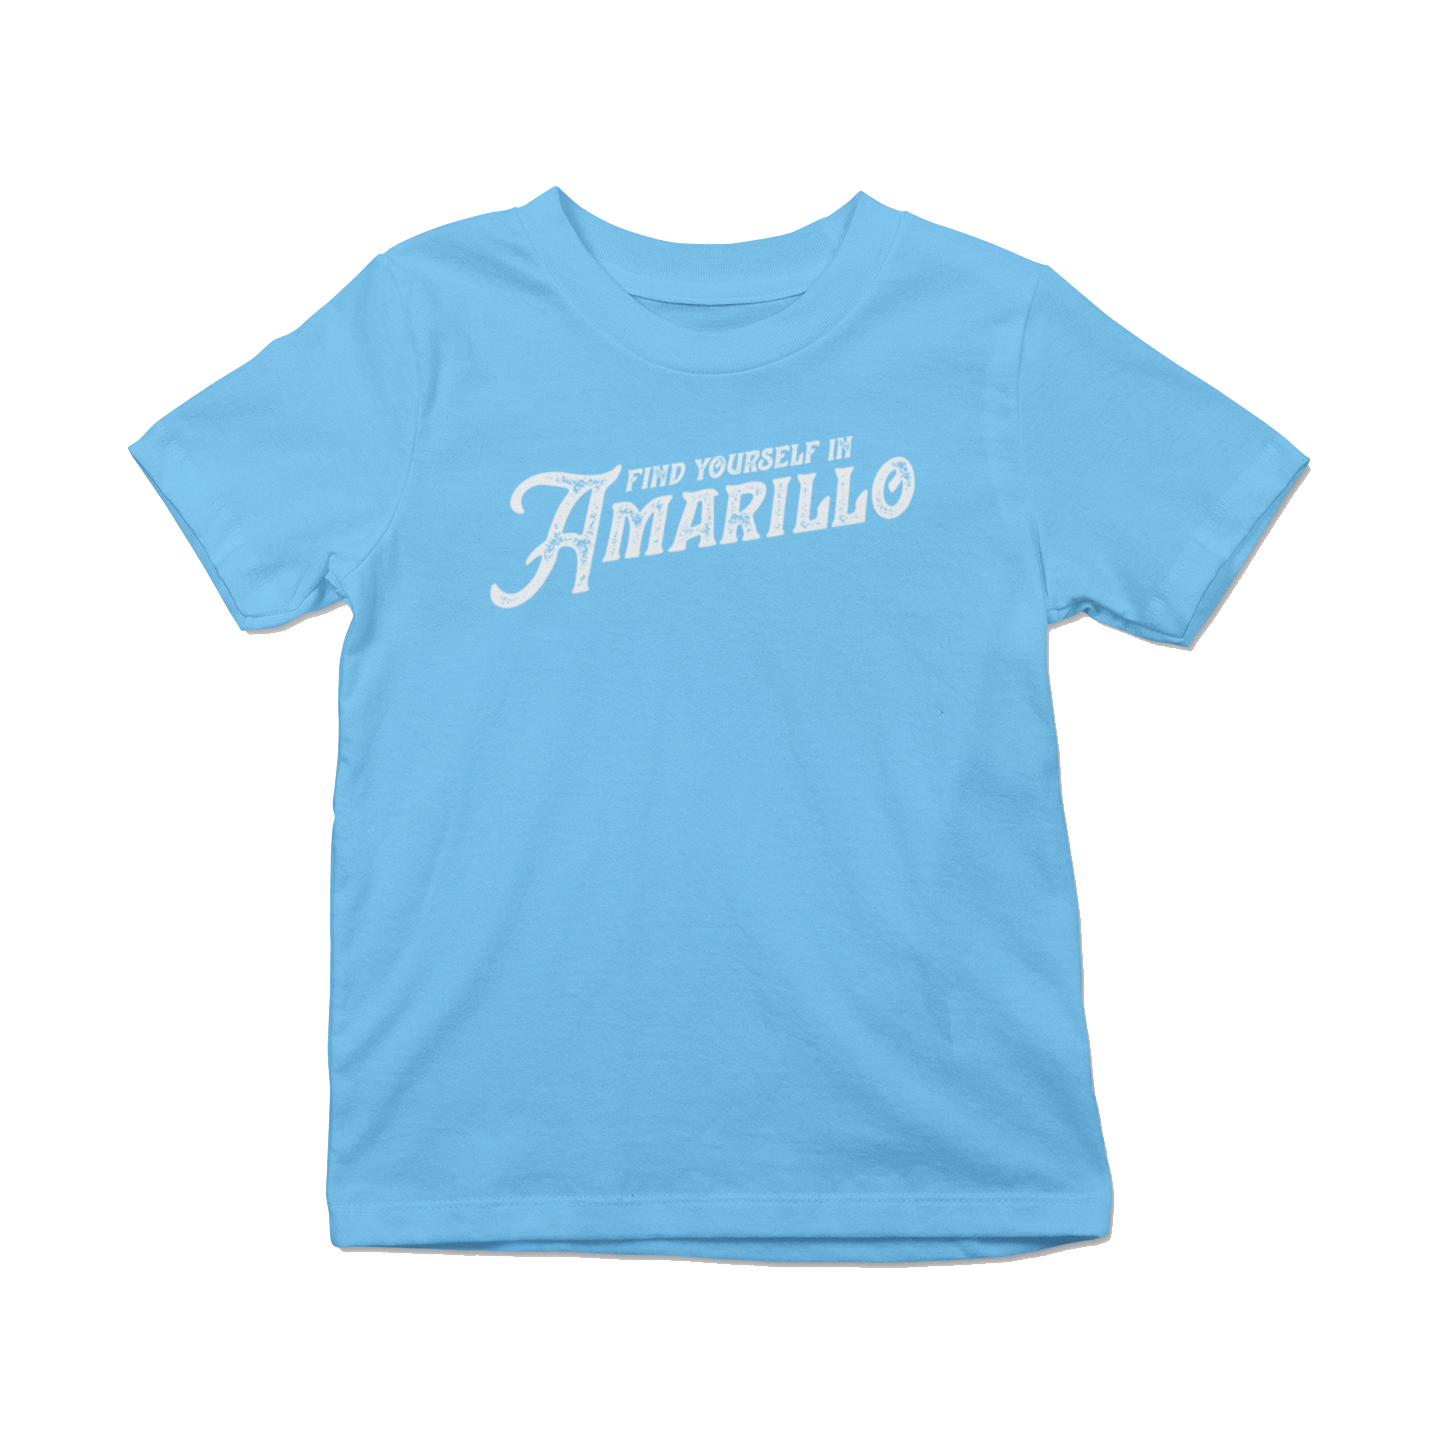 Amarillo Texas Youth T-shirt - Find Yourself